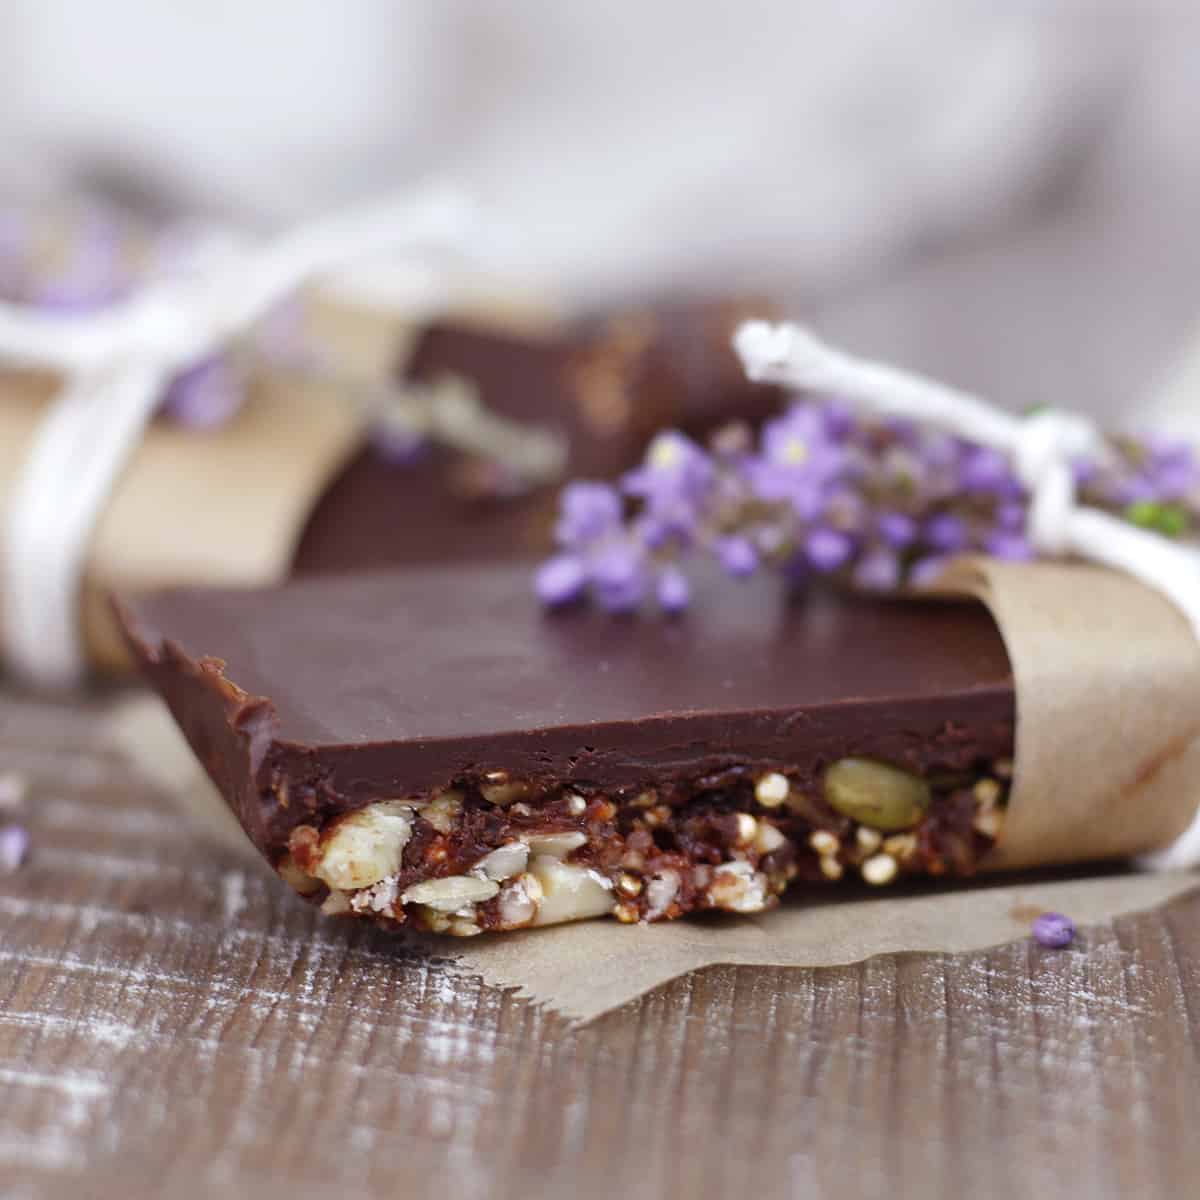 side view of a protein bar with a purple flower